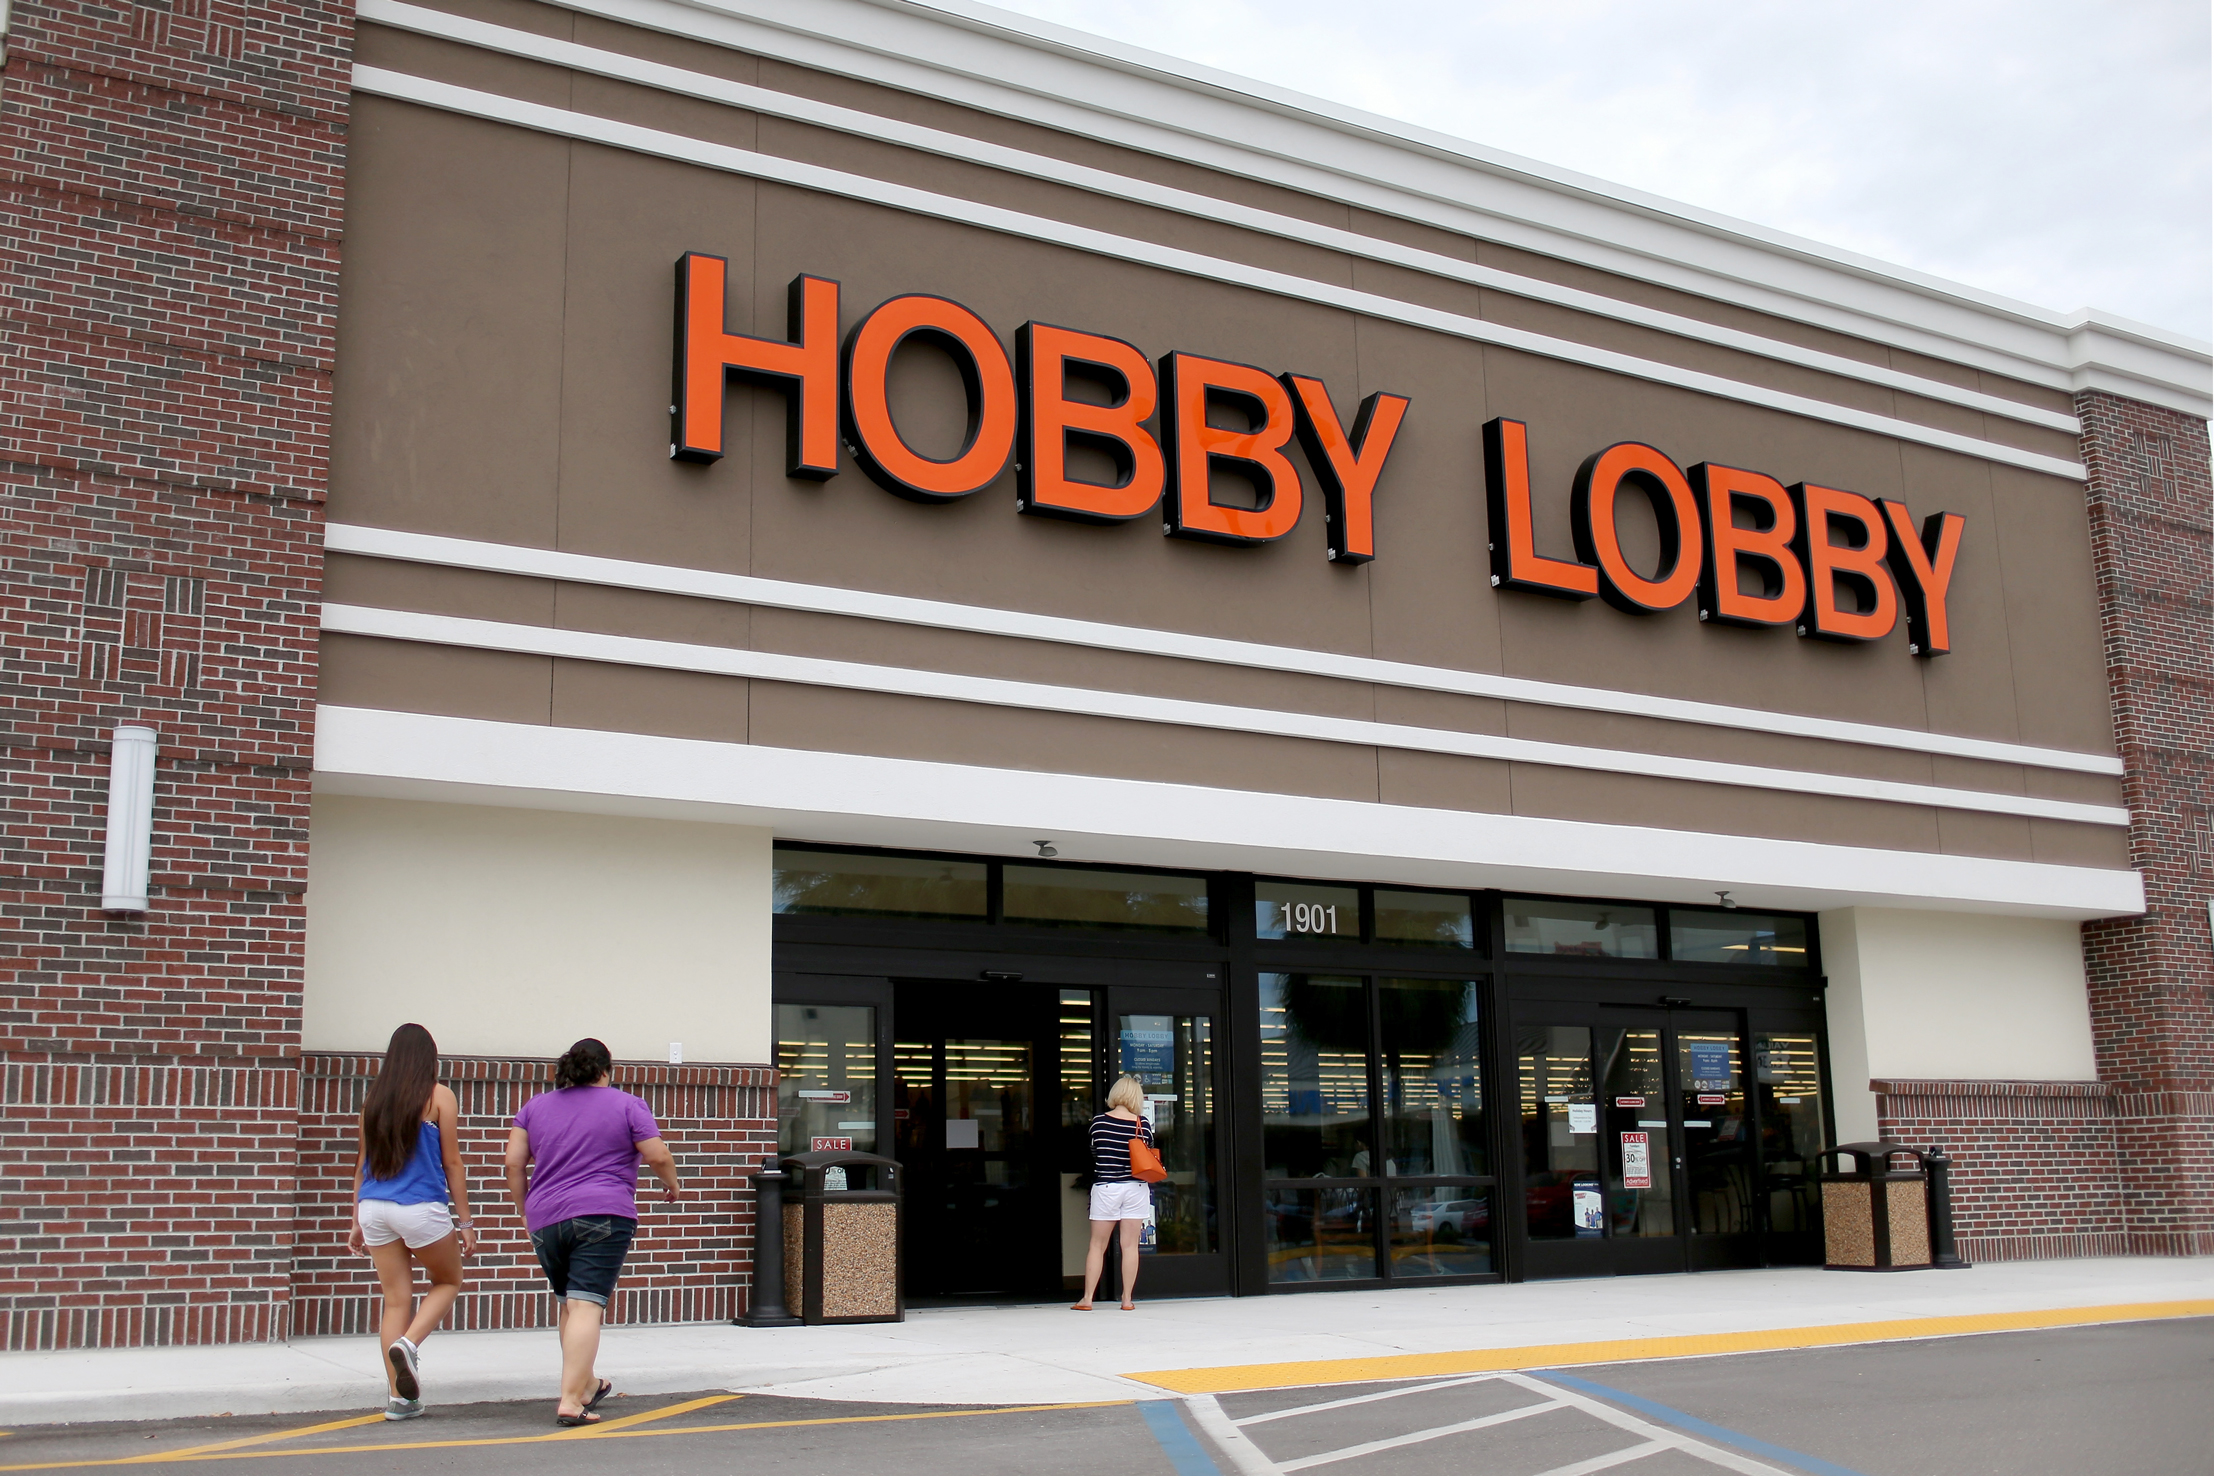 Hobby Lobby Increases Minimum Wage to $18.50 for Full-Time Employees